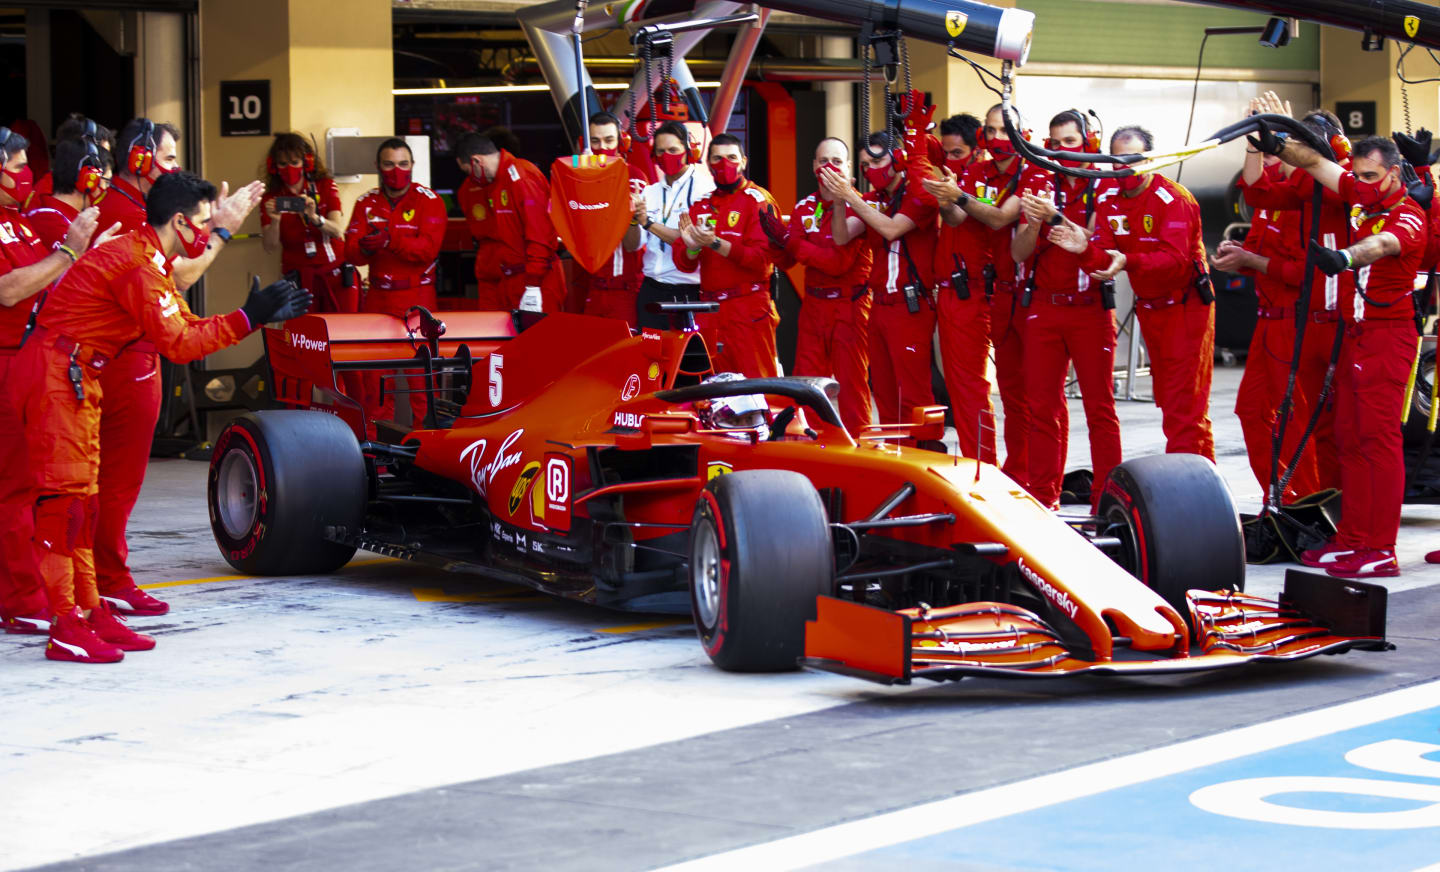 ABU DHABI, UNITED ARAB EMIRATES - DECEMBER 13: The Ferrari team applaud as Sebastian Vettel of Germany driving the (5) Scuderia Ferrari SF1000 leaves the garage for his final race for the team prior to the F1 Grand Prix of Abu Dhabi at Yas Marina Circuit on December 13, 2020 in Abu Dhabi, United Arab Emirates. (Photo by Mark Thompson/Getty Images)